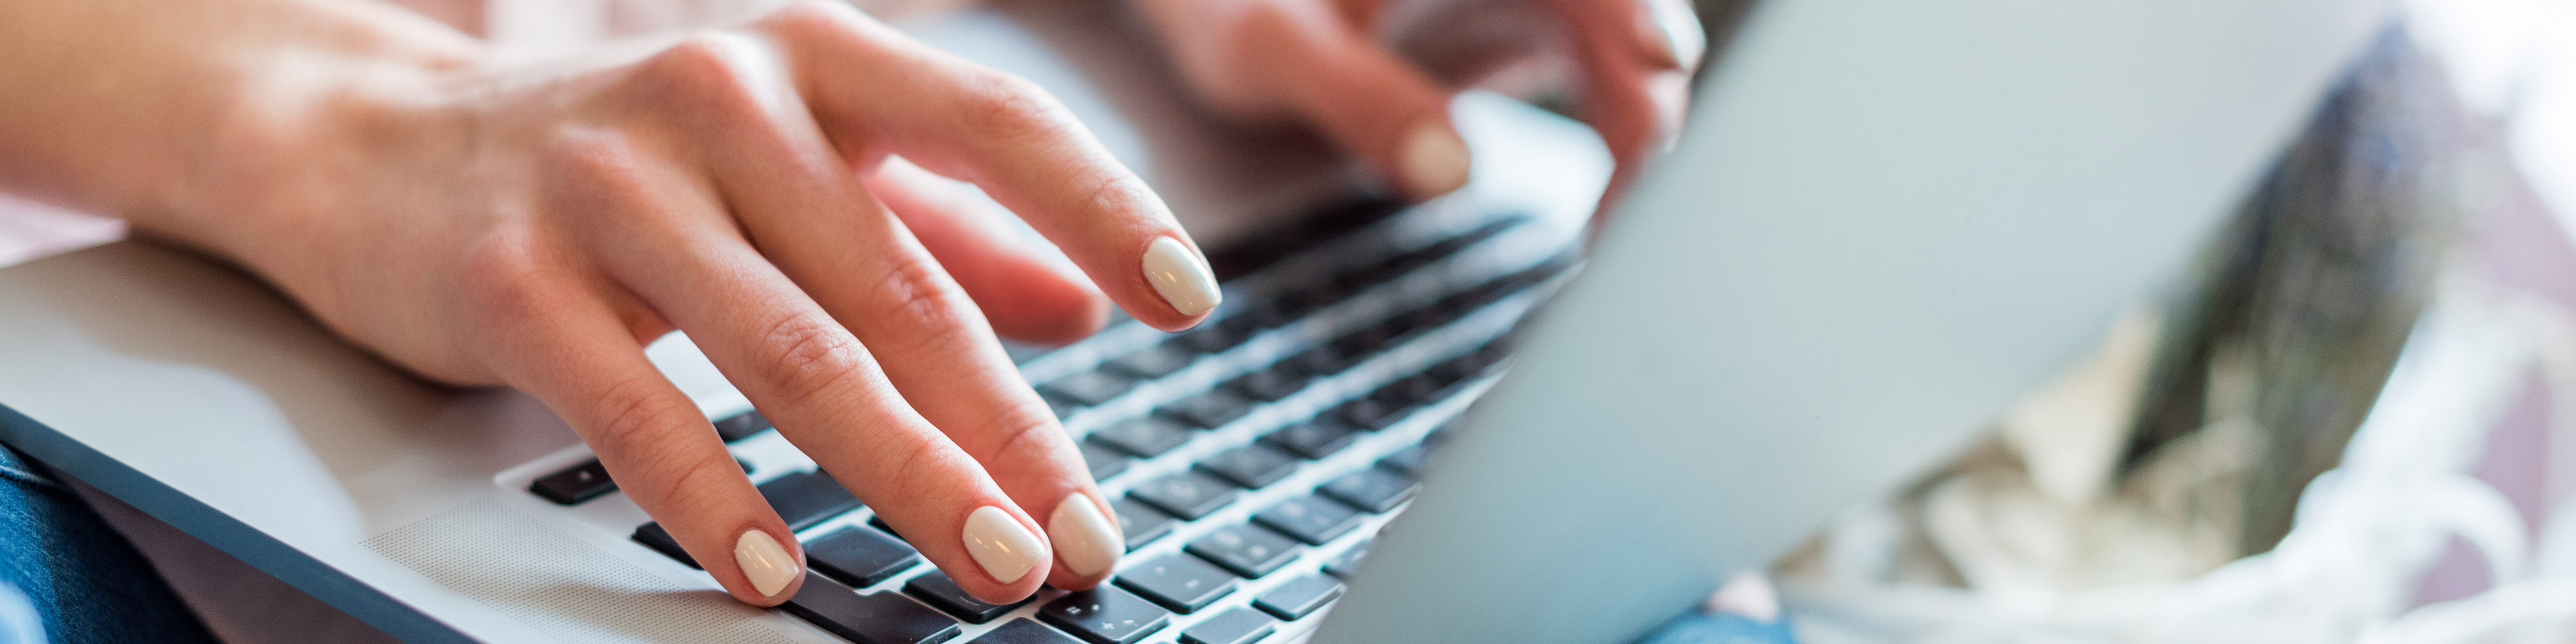 closeup of two female hands typing on a laptop computer